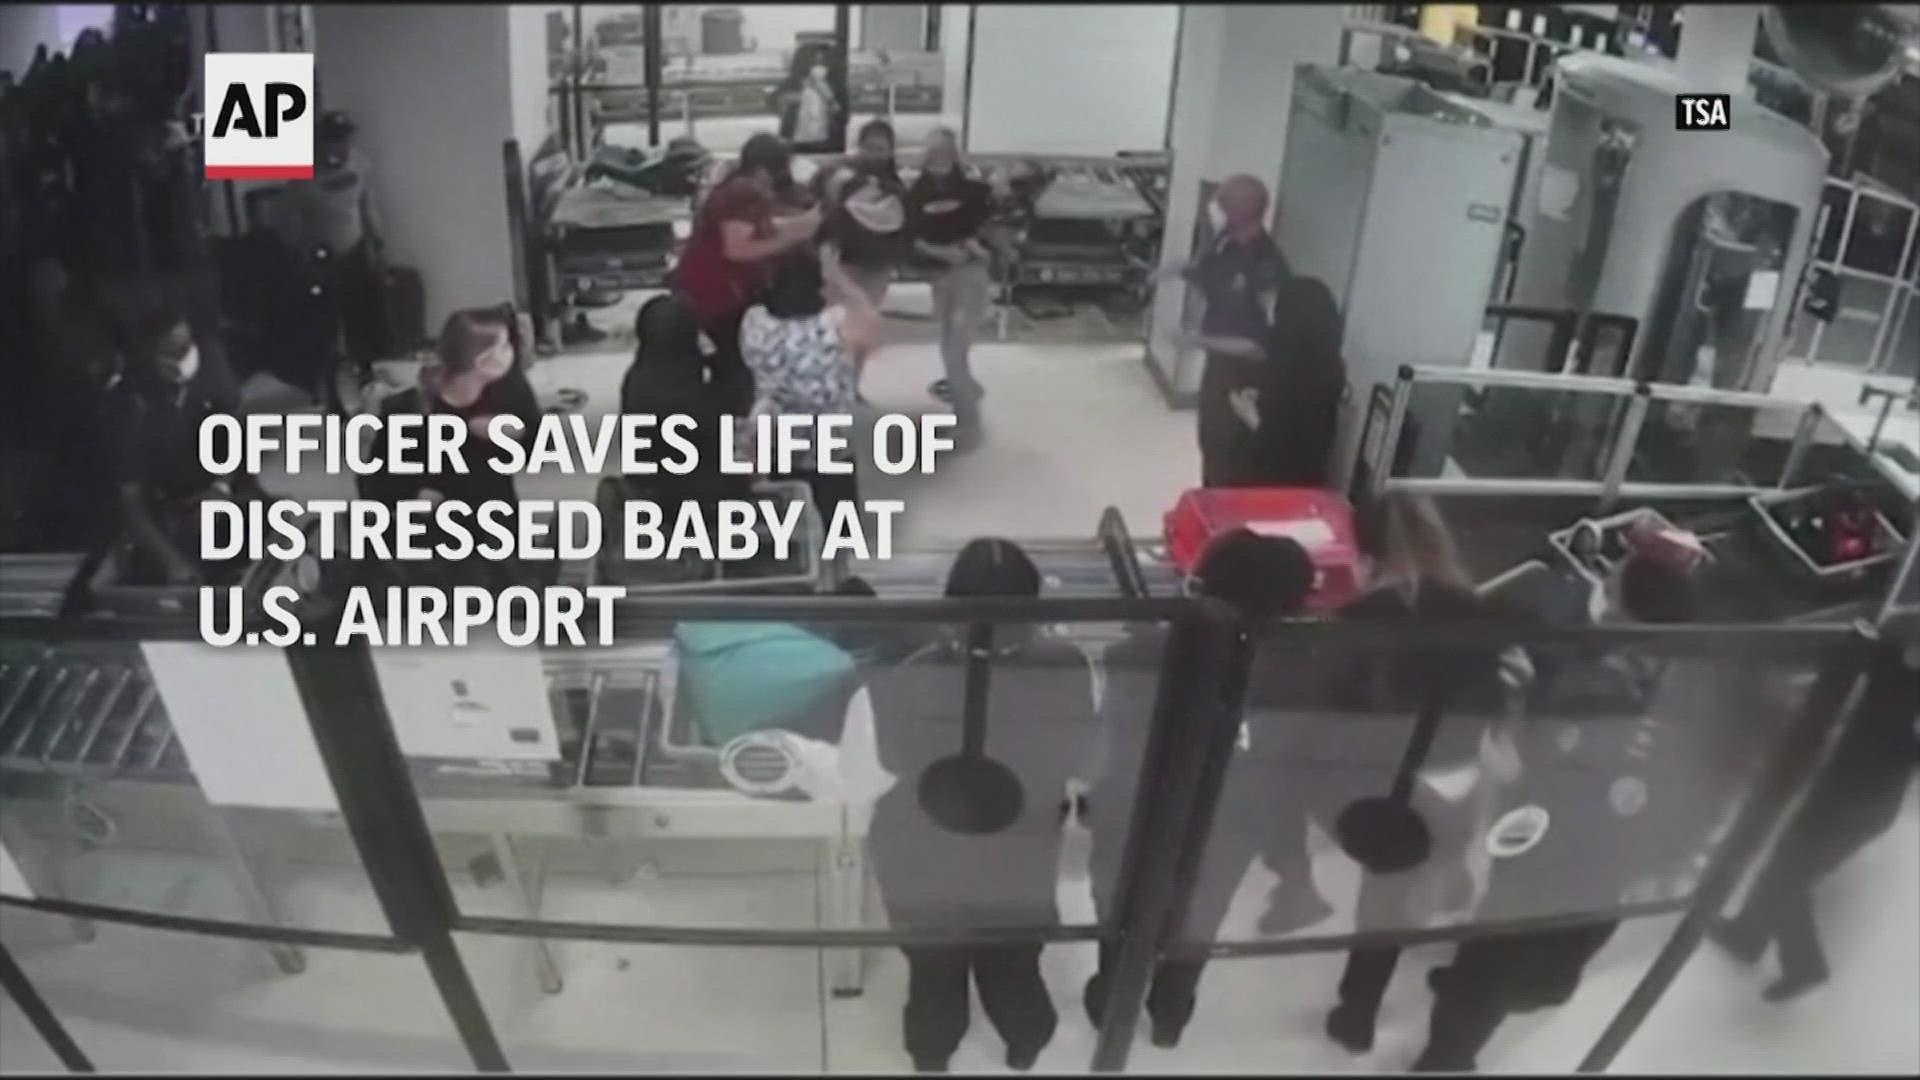 Surveillance video of an incident earlier in December showed TSA agent Cecilia Morales jumping over a conveyor belt to save a baby who stopped breathing.